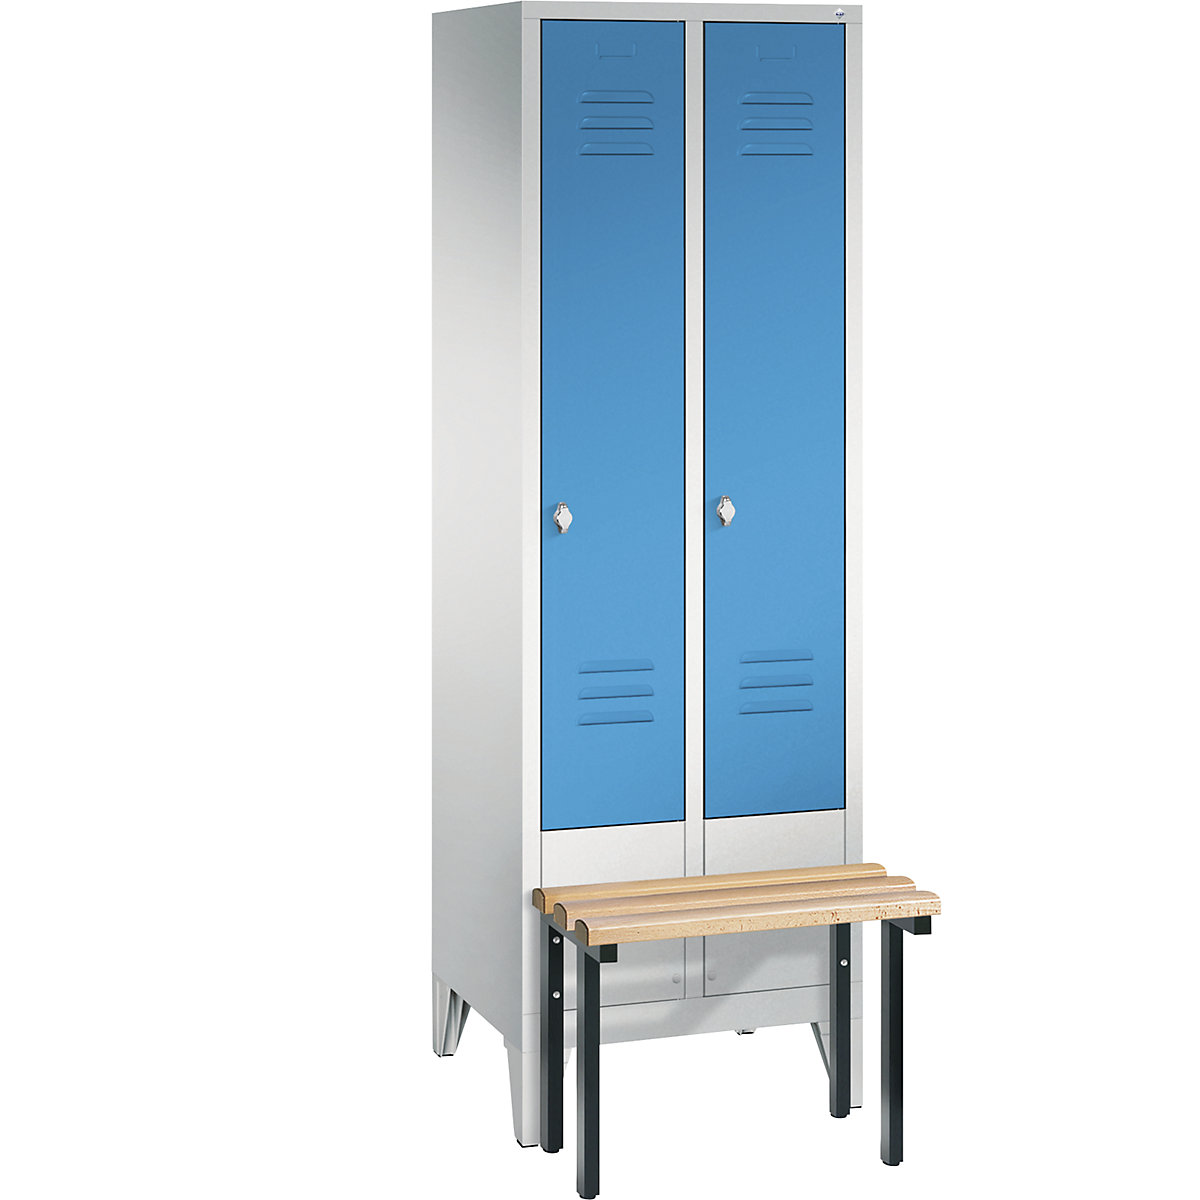 CLASSIC cloakroom locker with bench mounted in front – C+P, 2 compartments, compartment width 300 mm, light grey / light blue-9